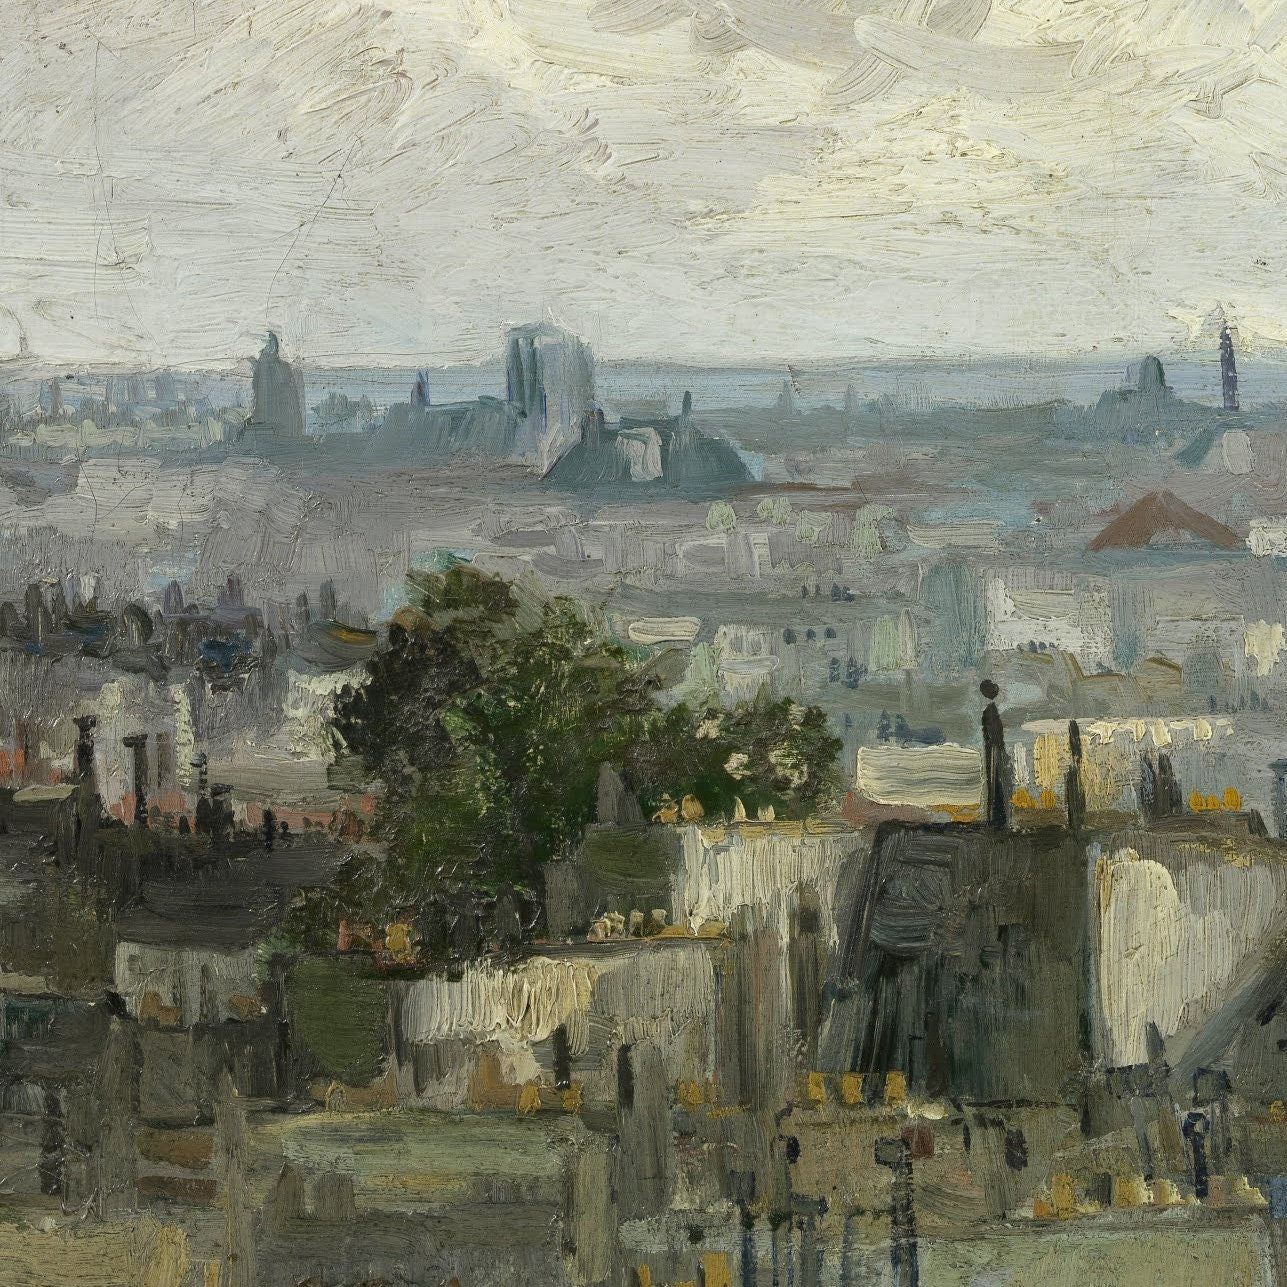 View of Paris by Vincent Van Gogh, 3d Printed with texture and brush strokes looks like original oil-painting, code:227